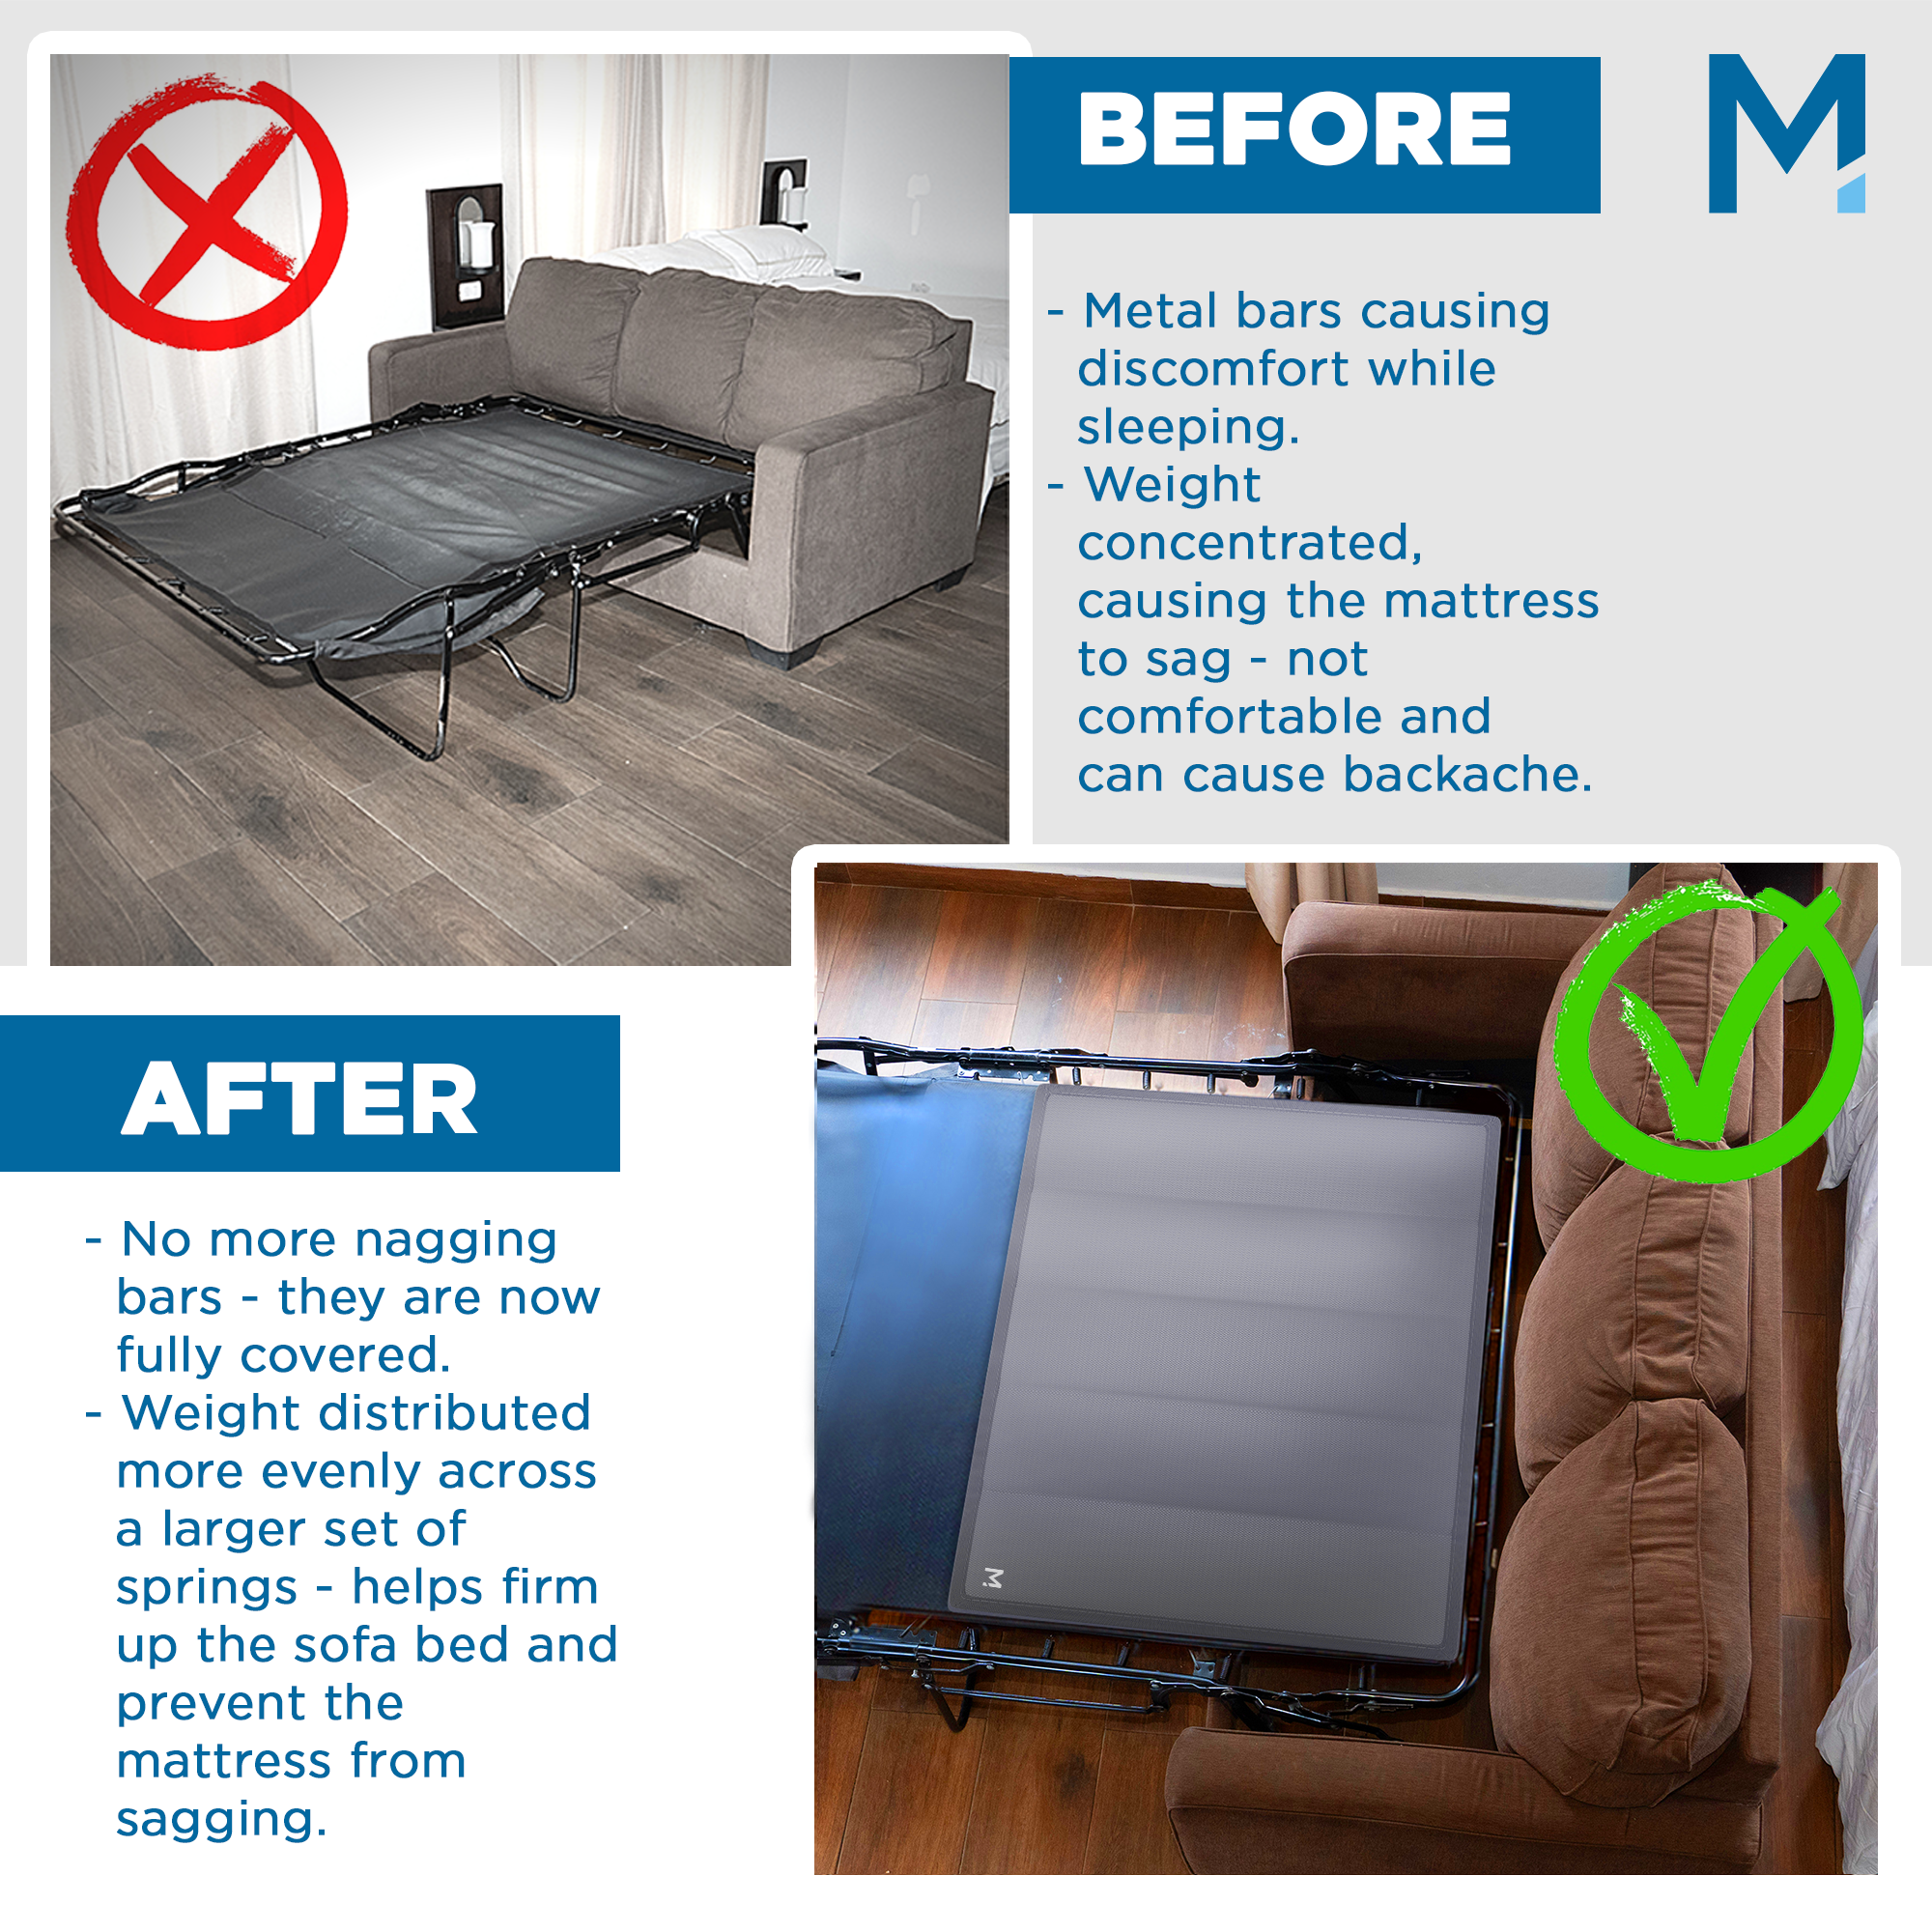 Meliusly® Sofa Cushion Support Board - Couch Support for Sagging